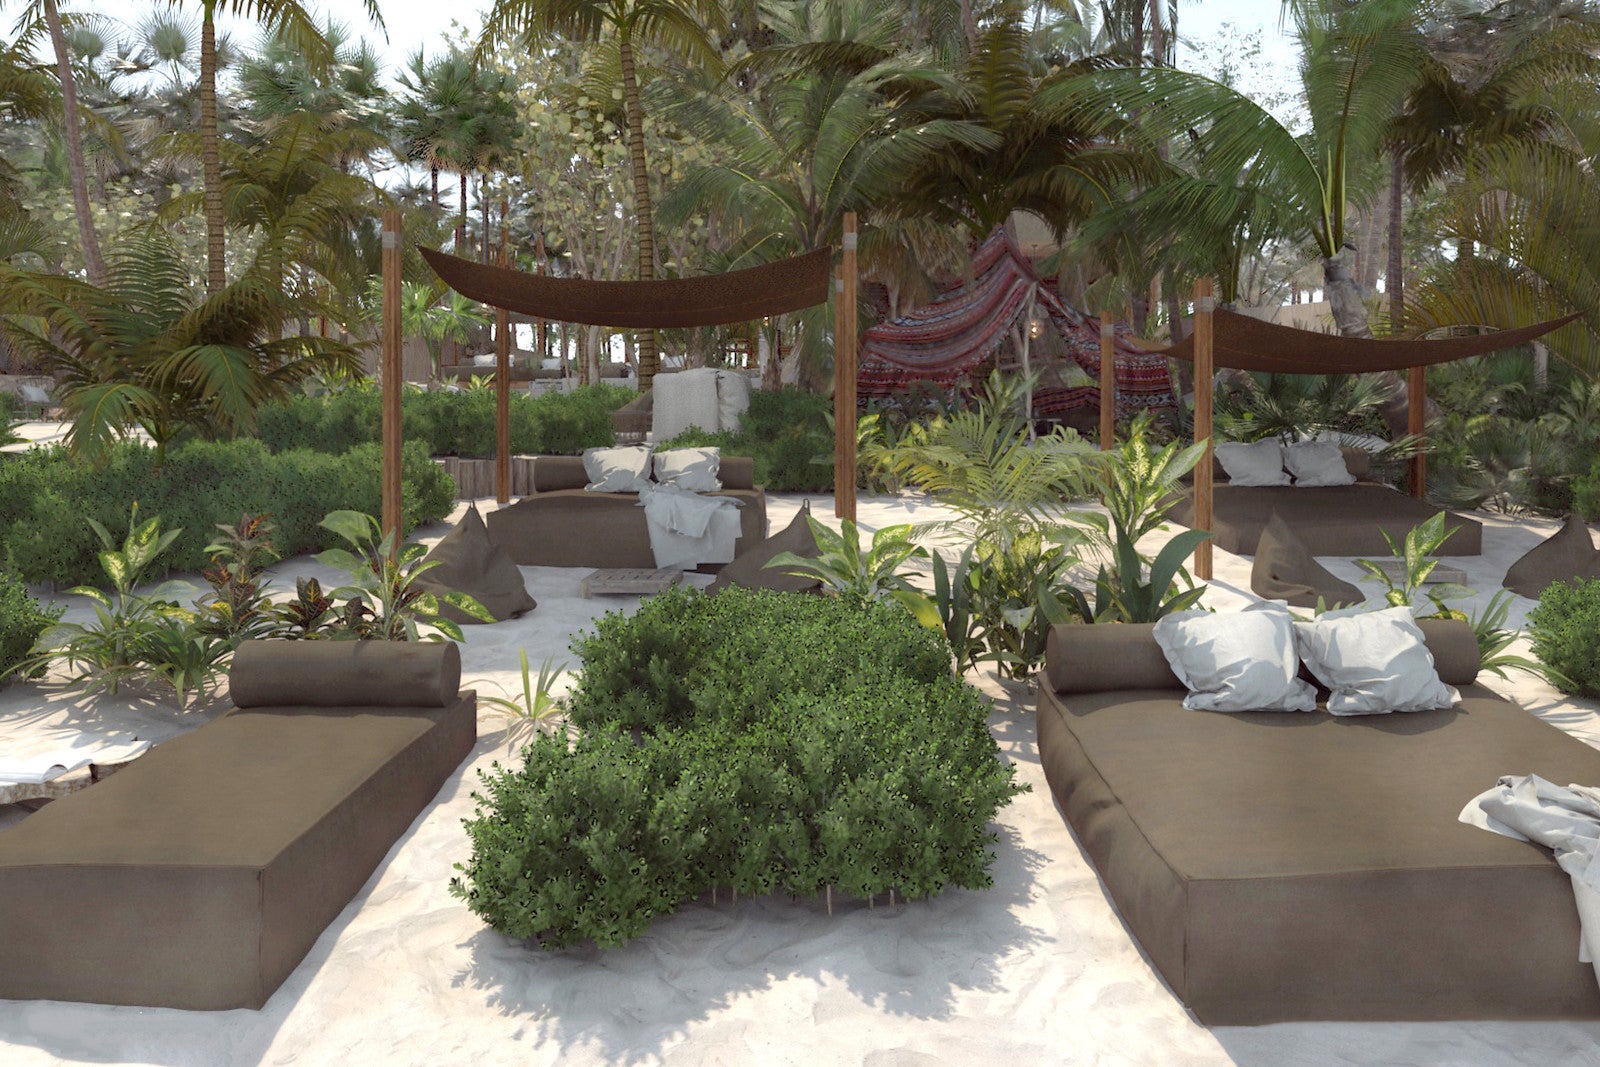 large daybeds with pillows on the sand surrounded by greenery